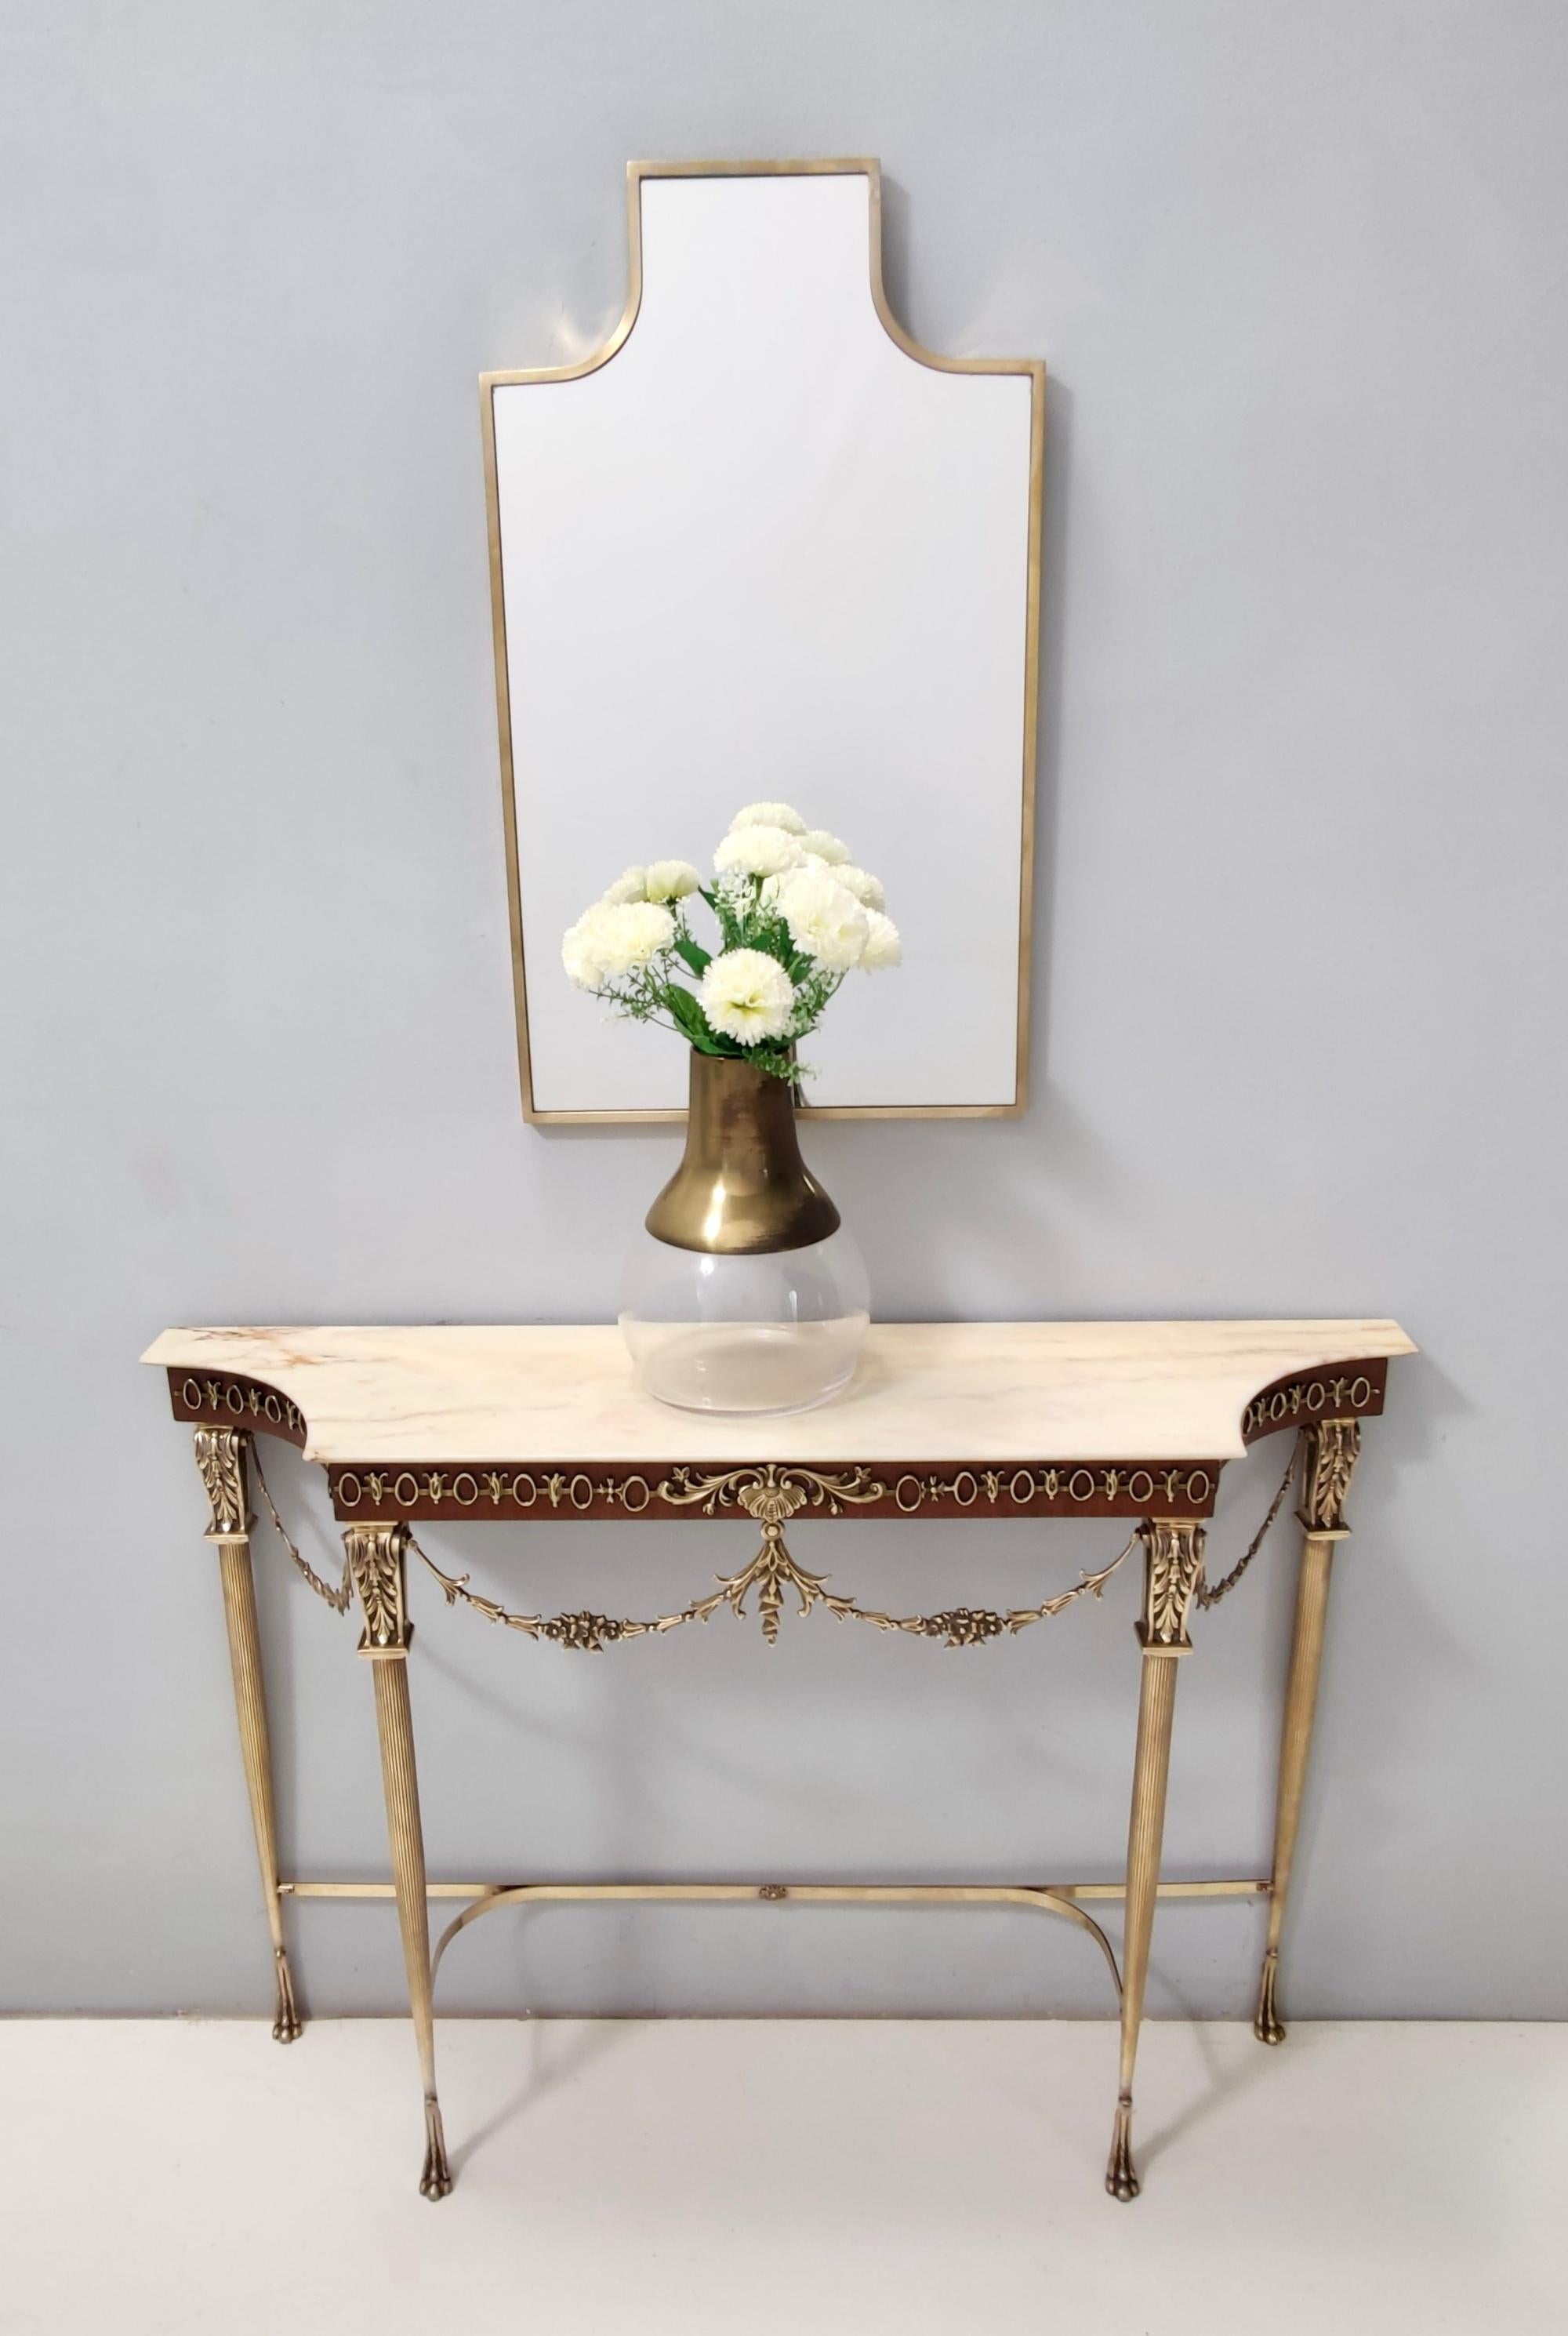 Made in Italy, 1950s.
This console table features a Portuguese pink marble top and a brass and walnut frame. 
It is a vintage item, therefore it might show slight traces of use, but it can be considered as in excellent original condition and ready